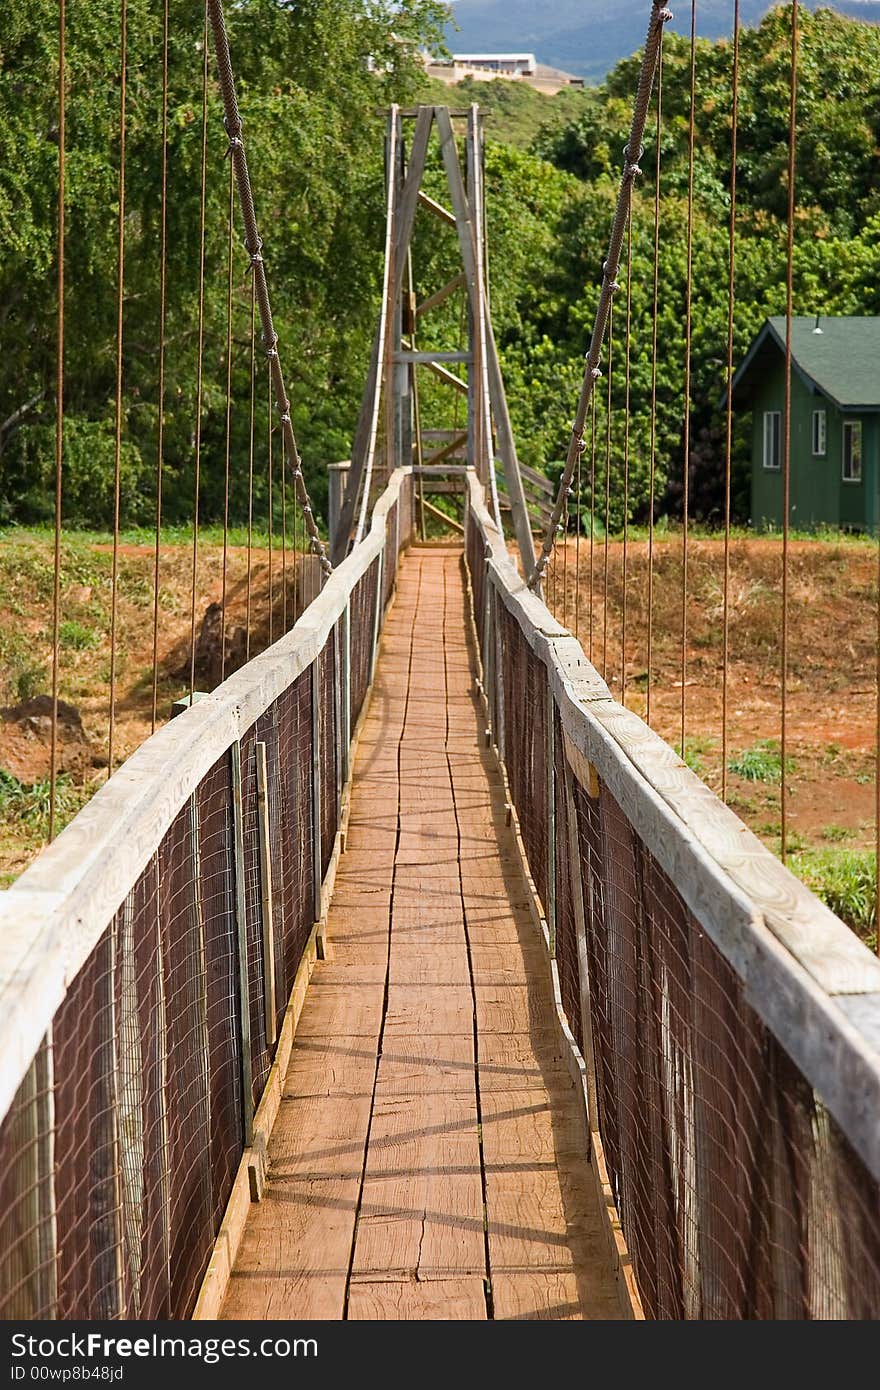 A walking bridge in Hawaii on the island of Kauai. The path is centered in the composition to create an even and balanced image. A walking bridge in Hawaii on the island of Kauai. The path is centered in the composition to create an even and balanced image.